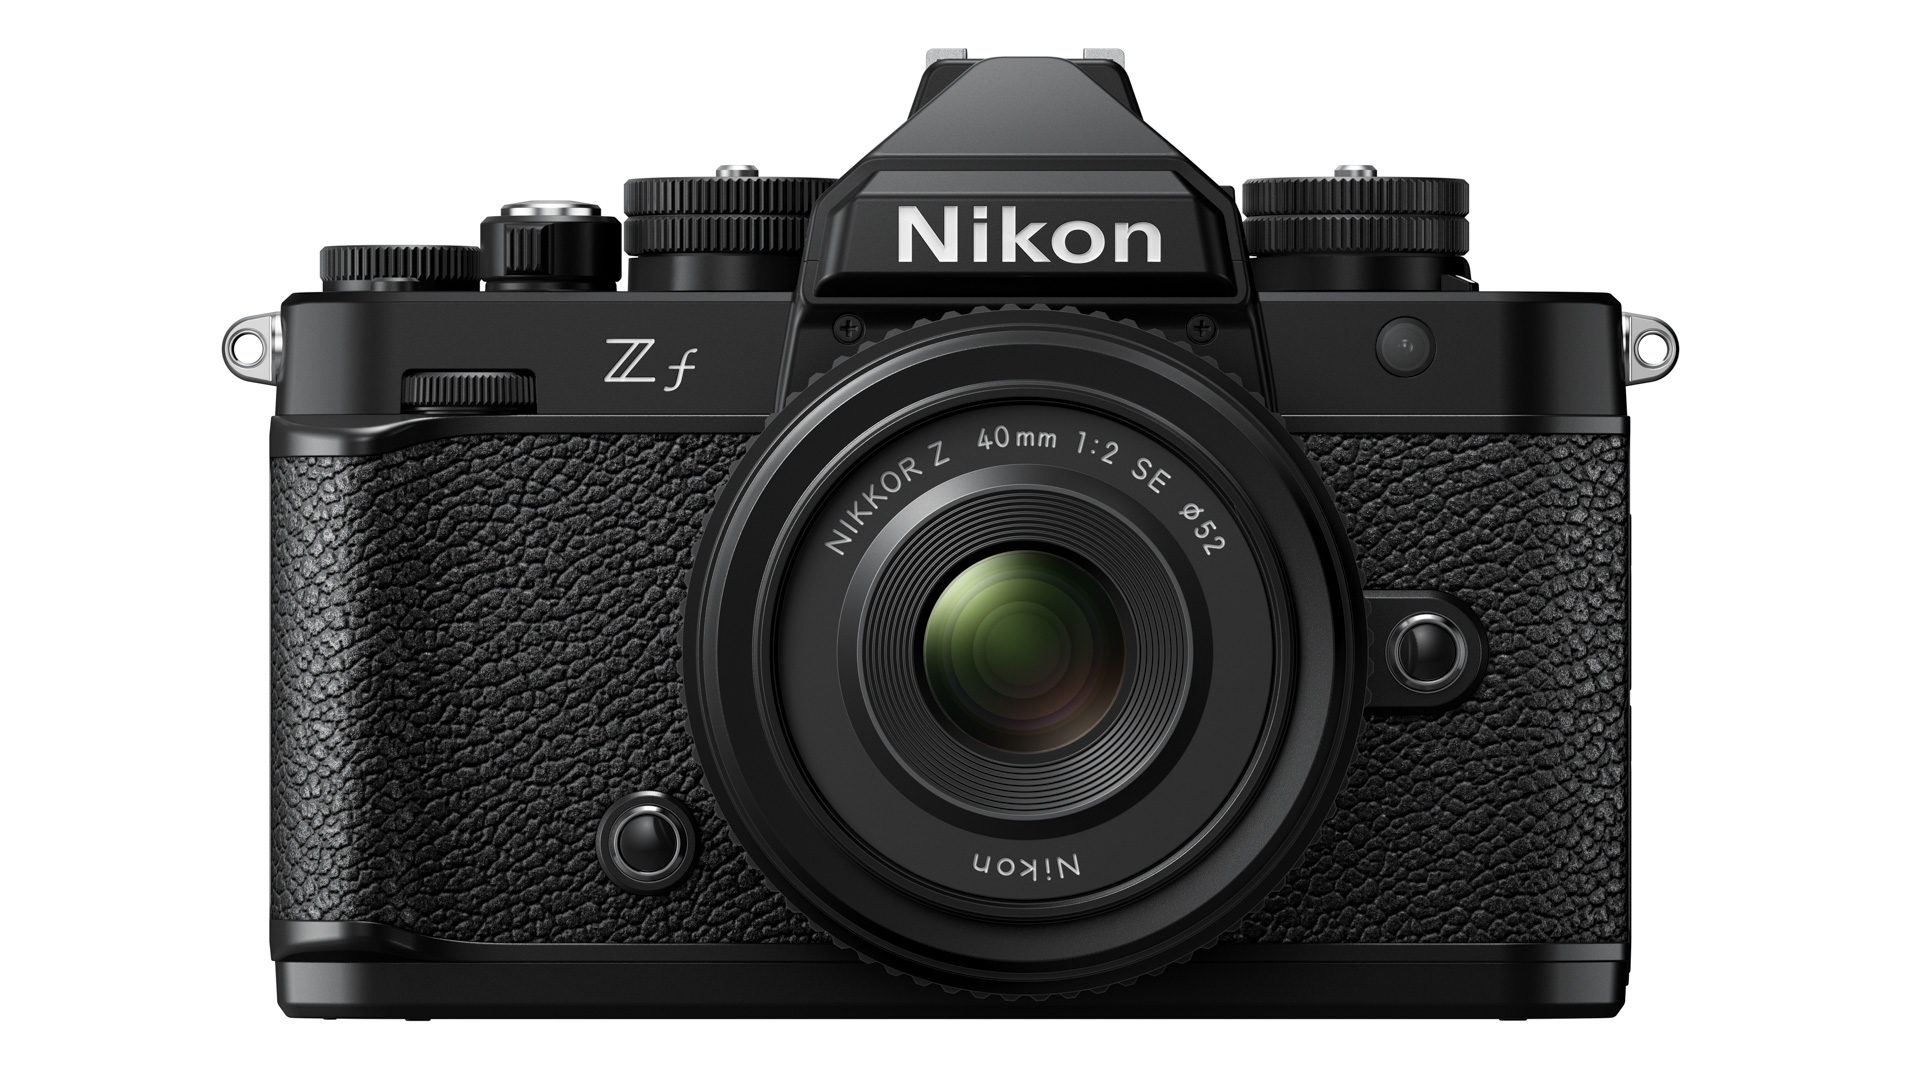 Nikon Zf front, lens attached, on a white background